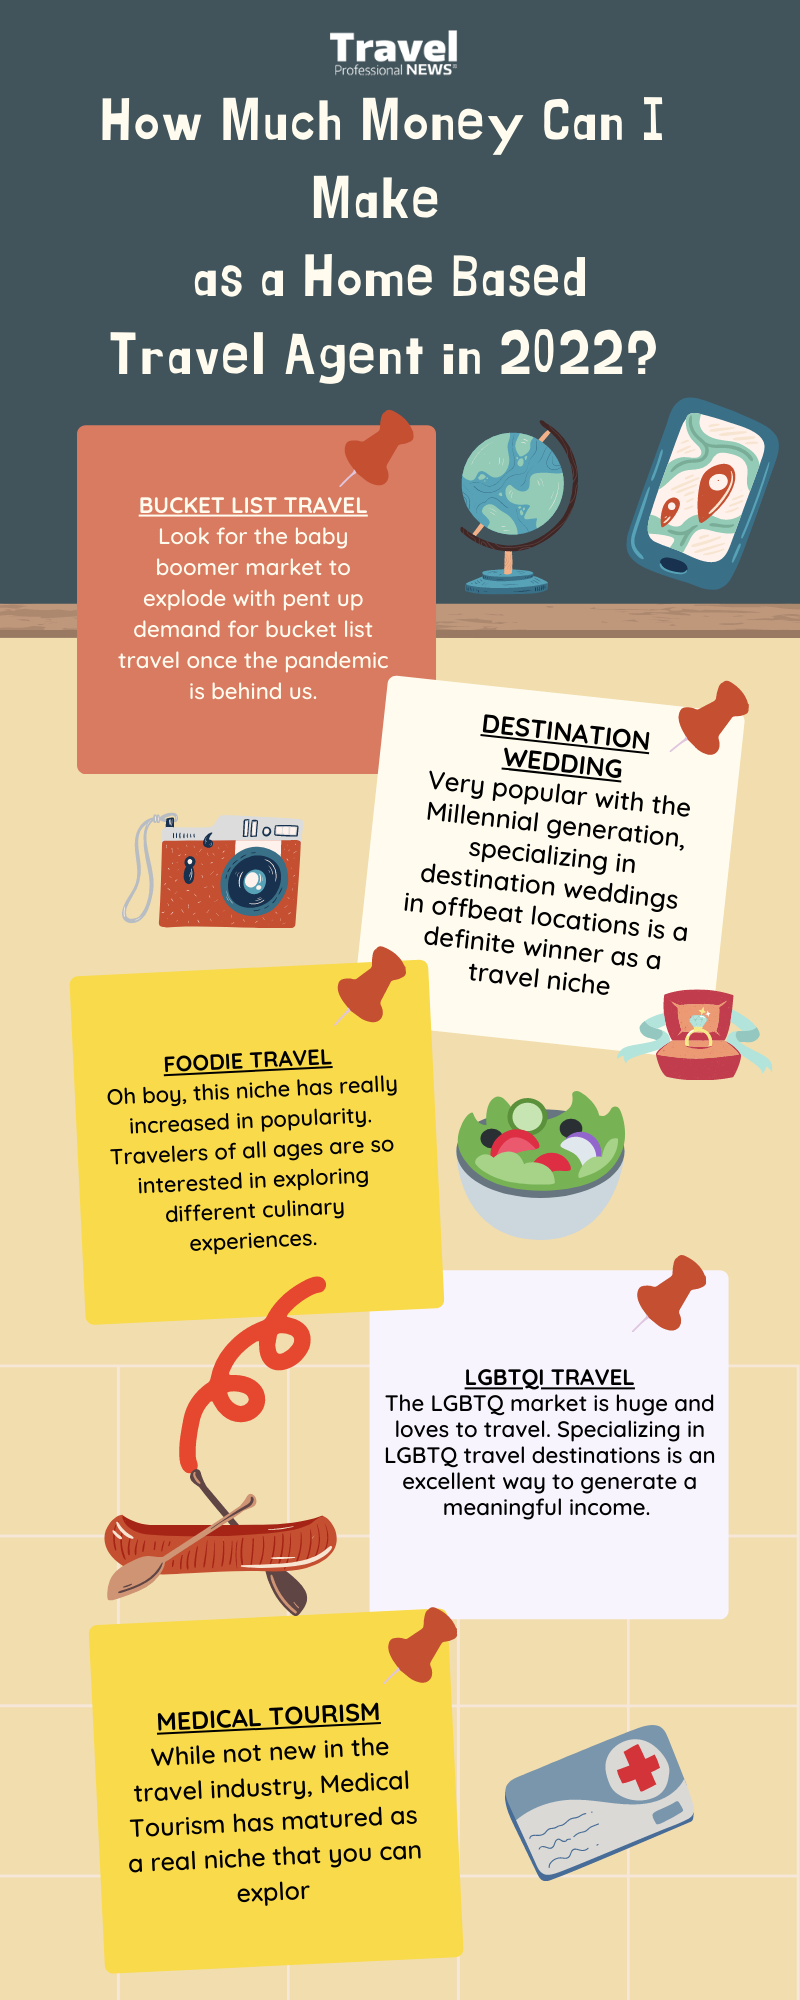 How-Much-Money-Can-I-Make-as-a-Home-Based-Travel-Agent-in-2022-Infographic-2-TPN